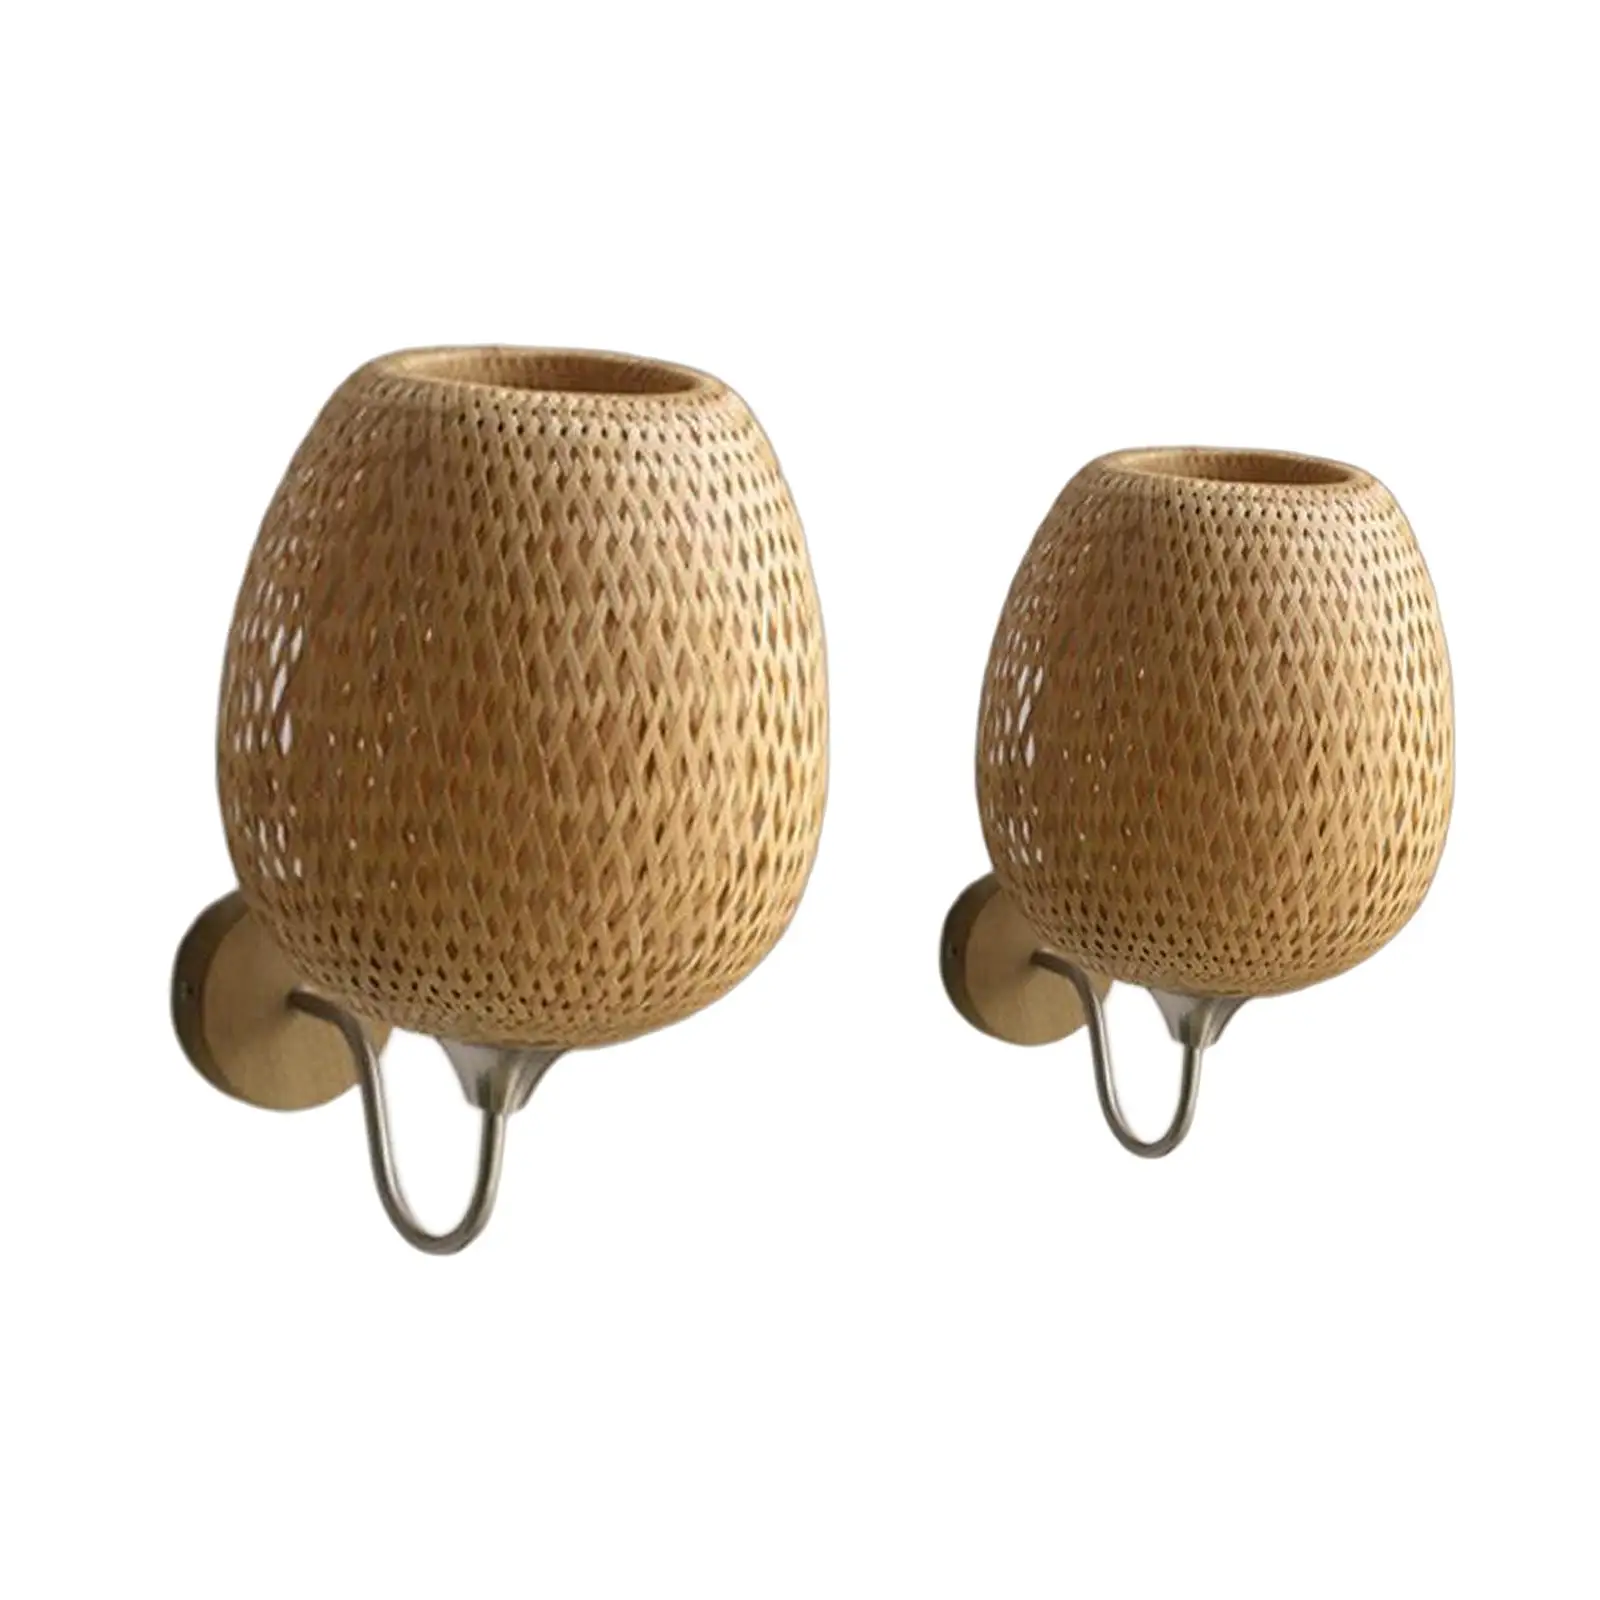 Rattan Wall Sconce Light Fixture Vintage Wall Lamp Lighting Fixture for Living